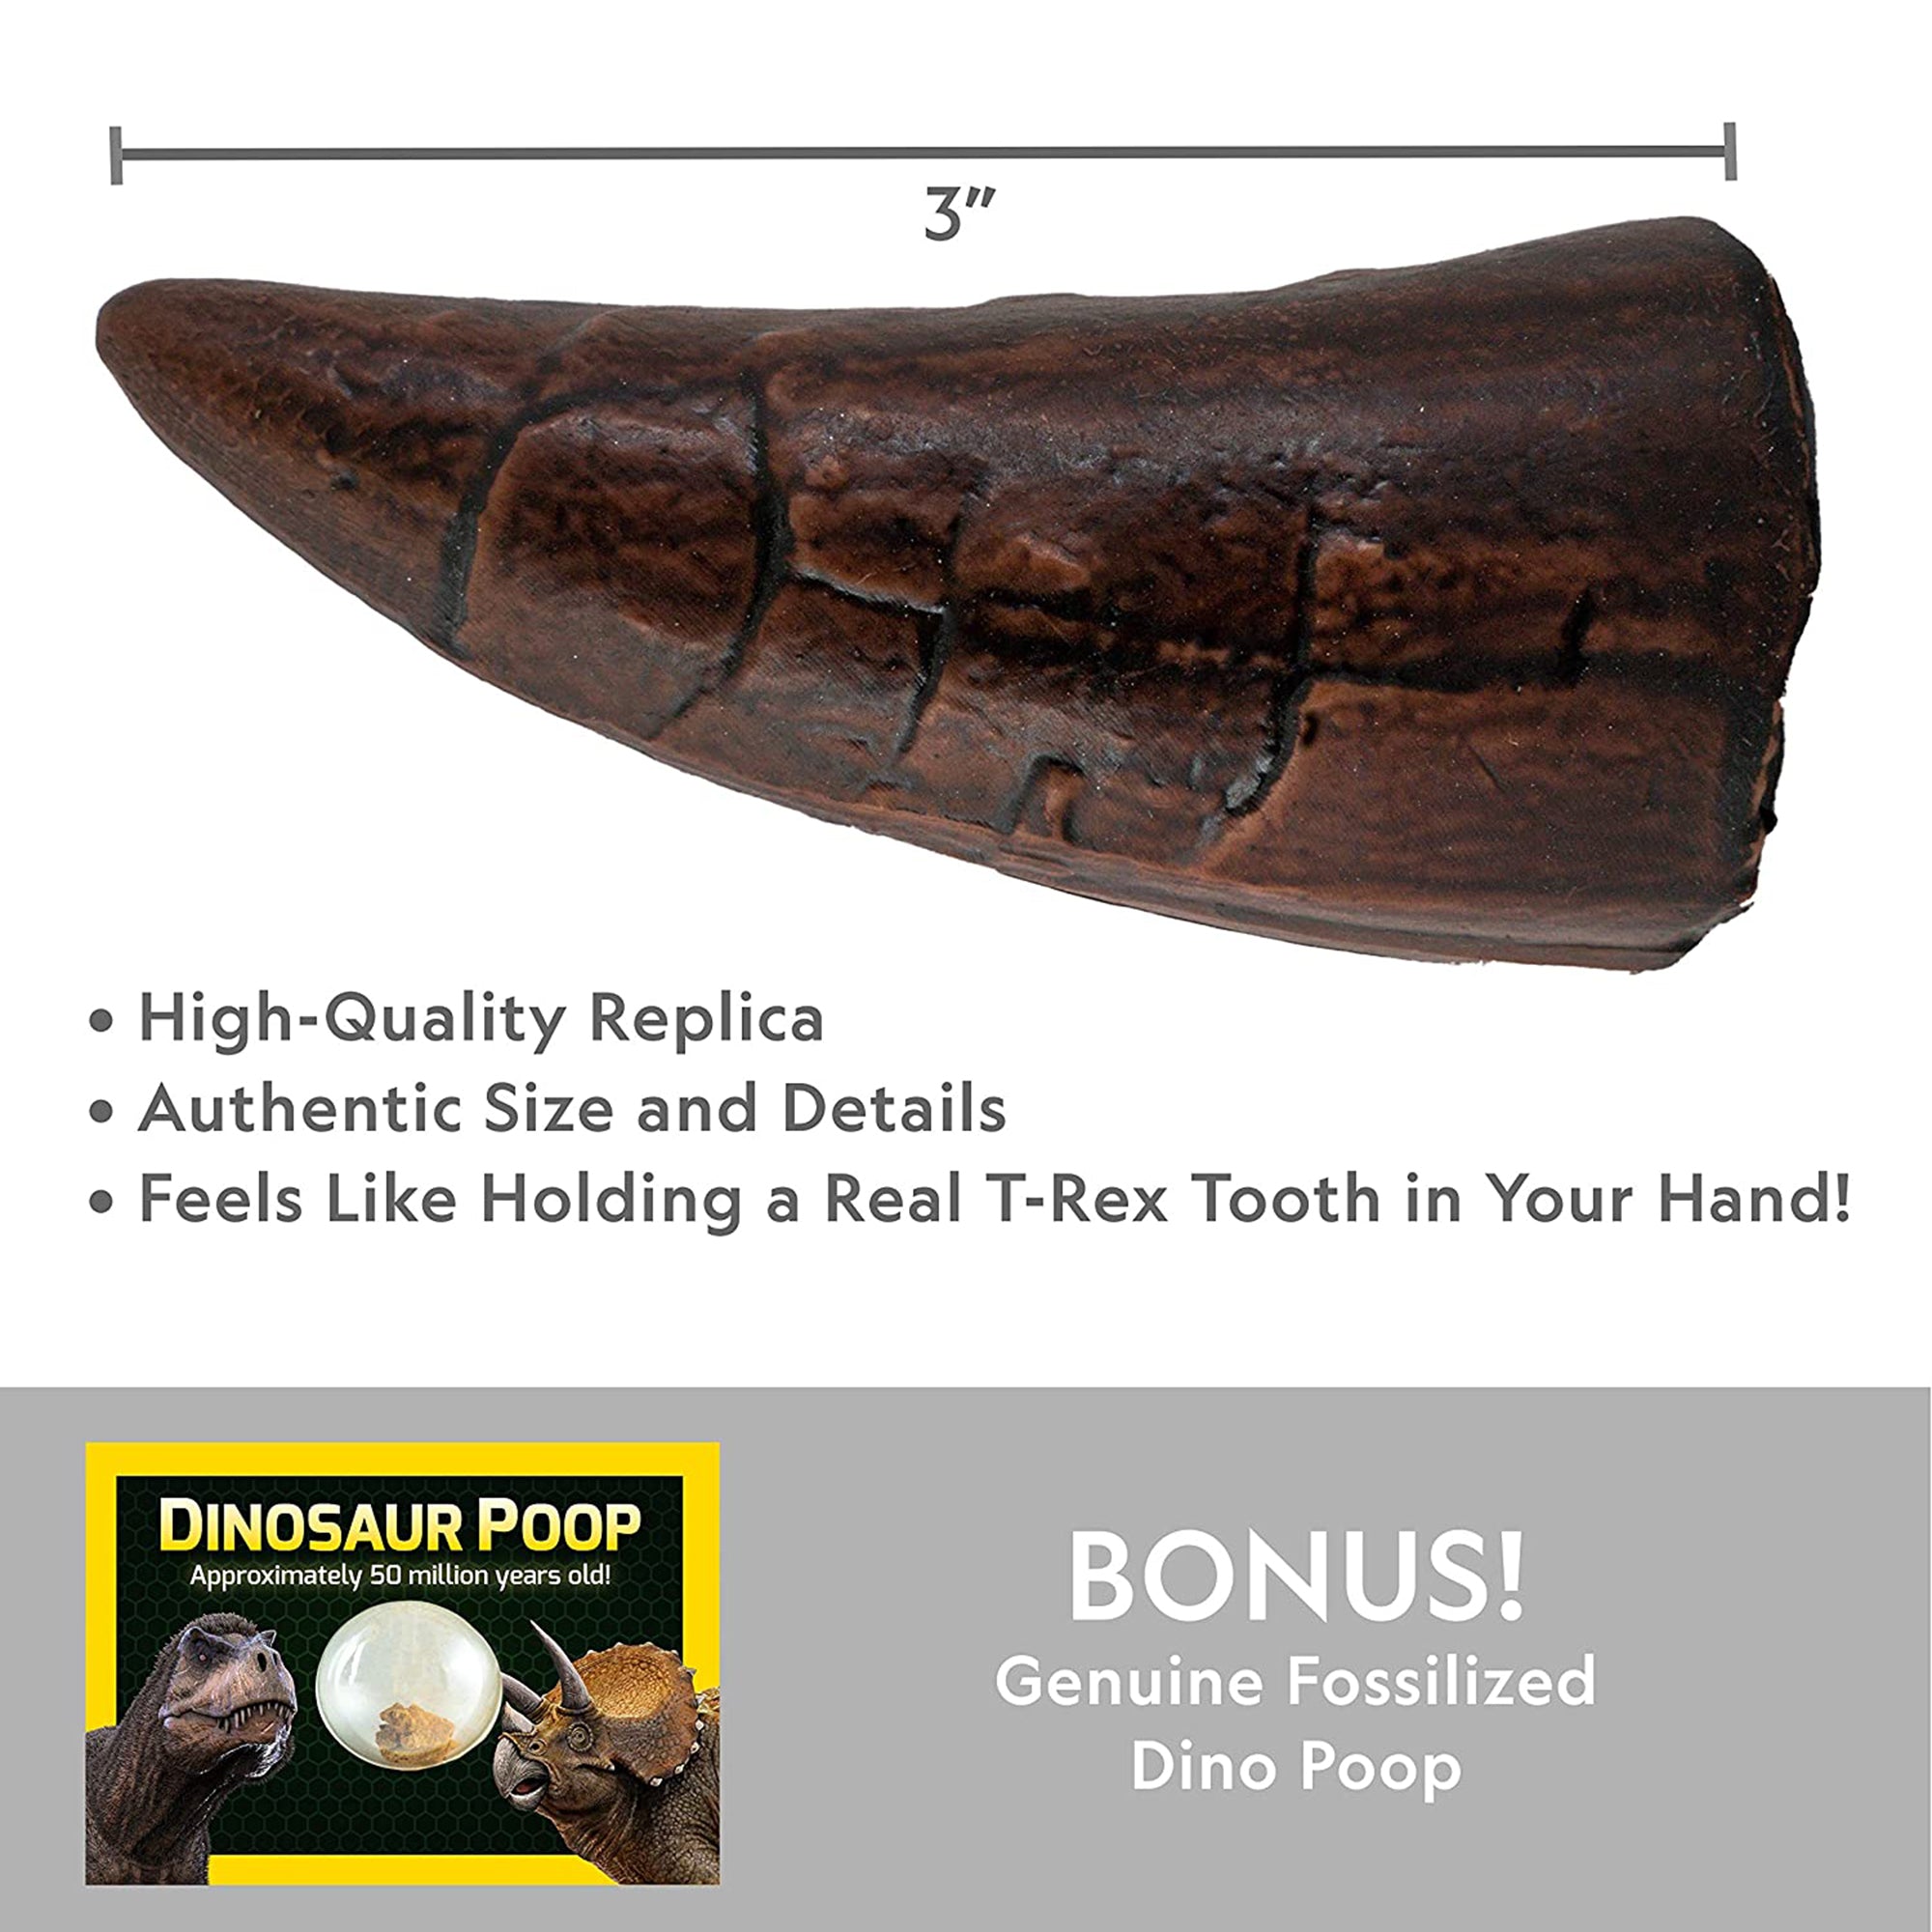 NATIONAL GEOGRAPHIC DINO FOSSIL DIG KIT